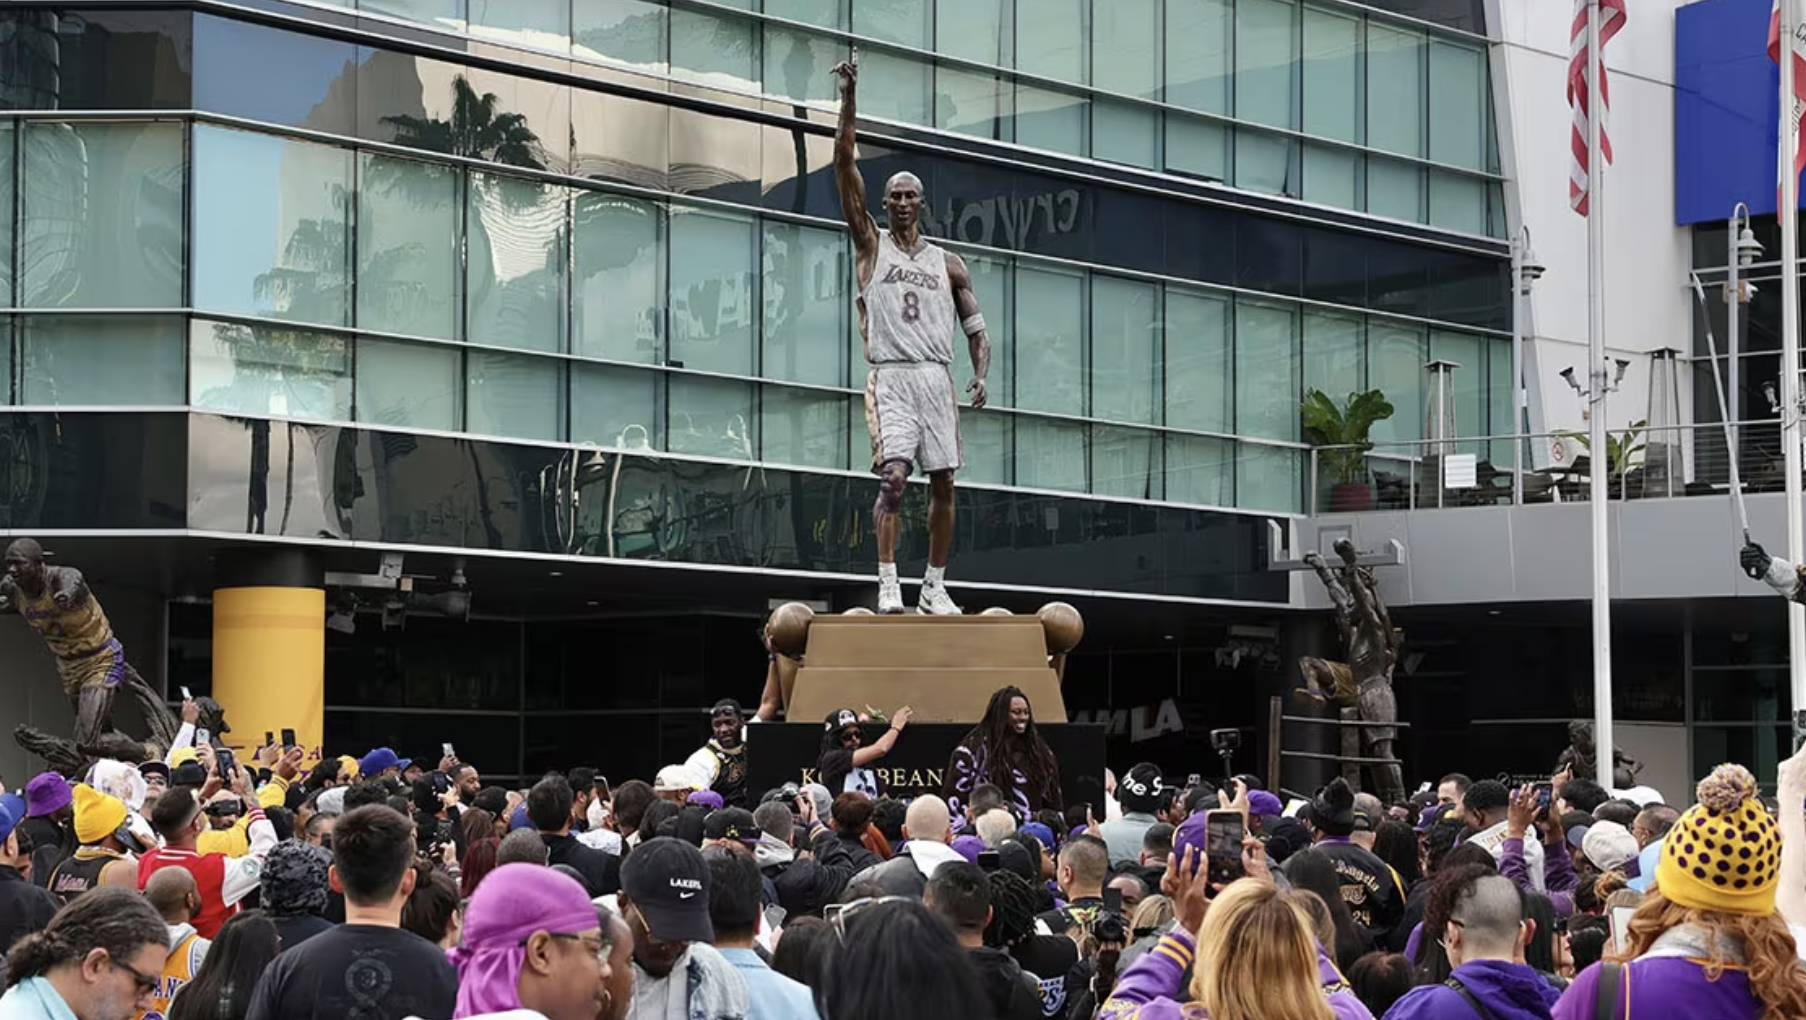 How We Honor Legends: Kobe Bryant’s First Statue